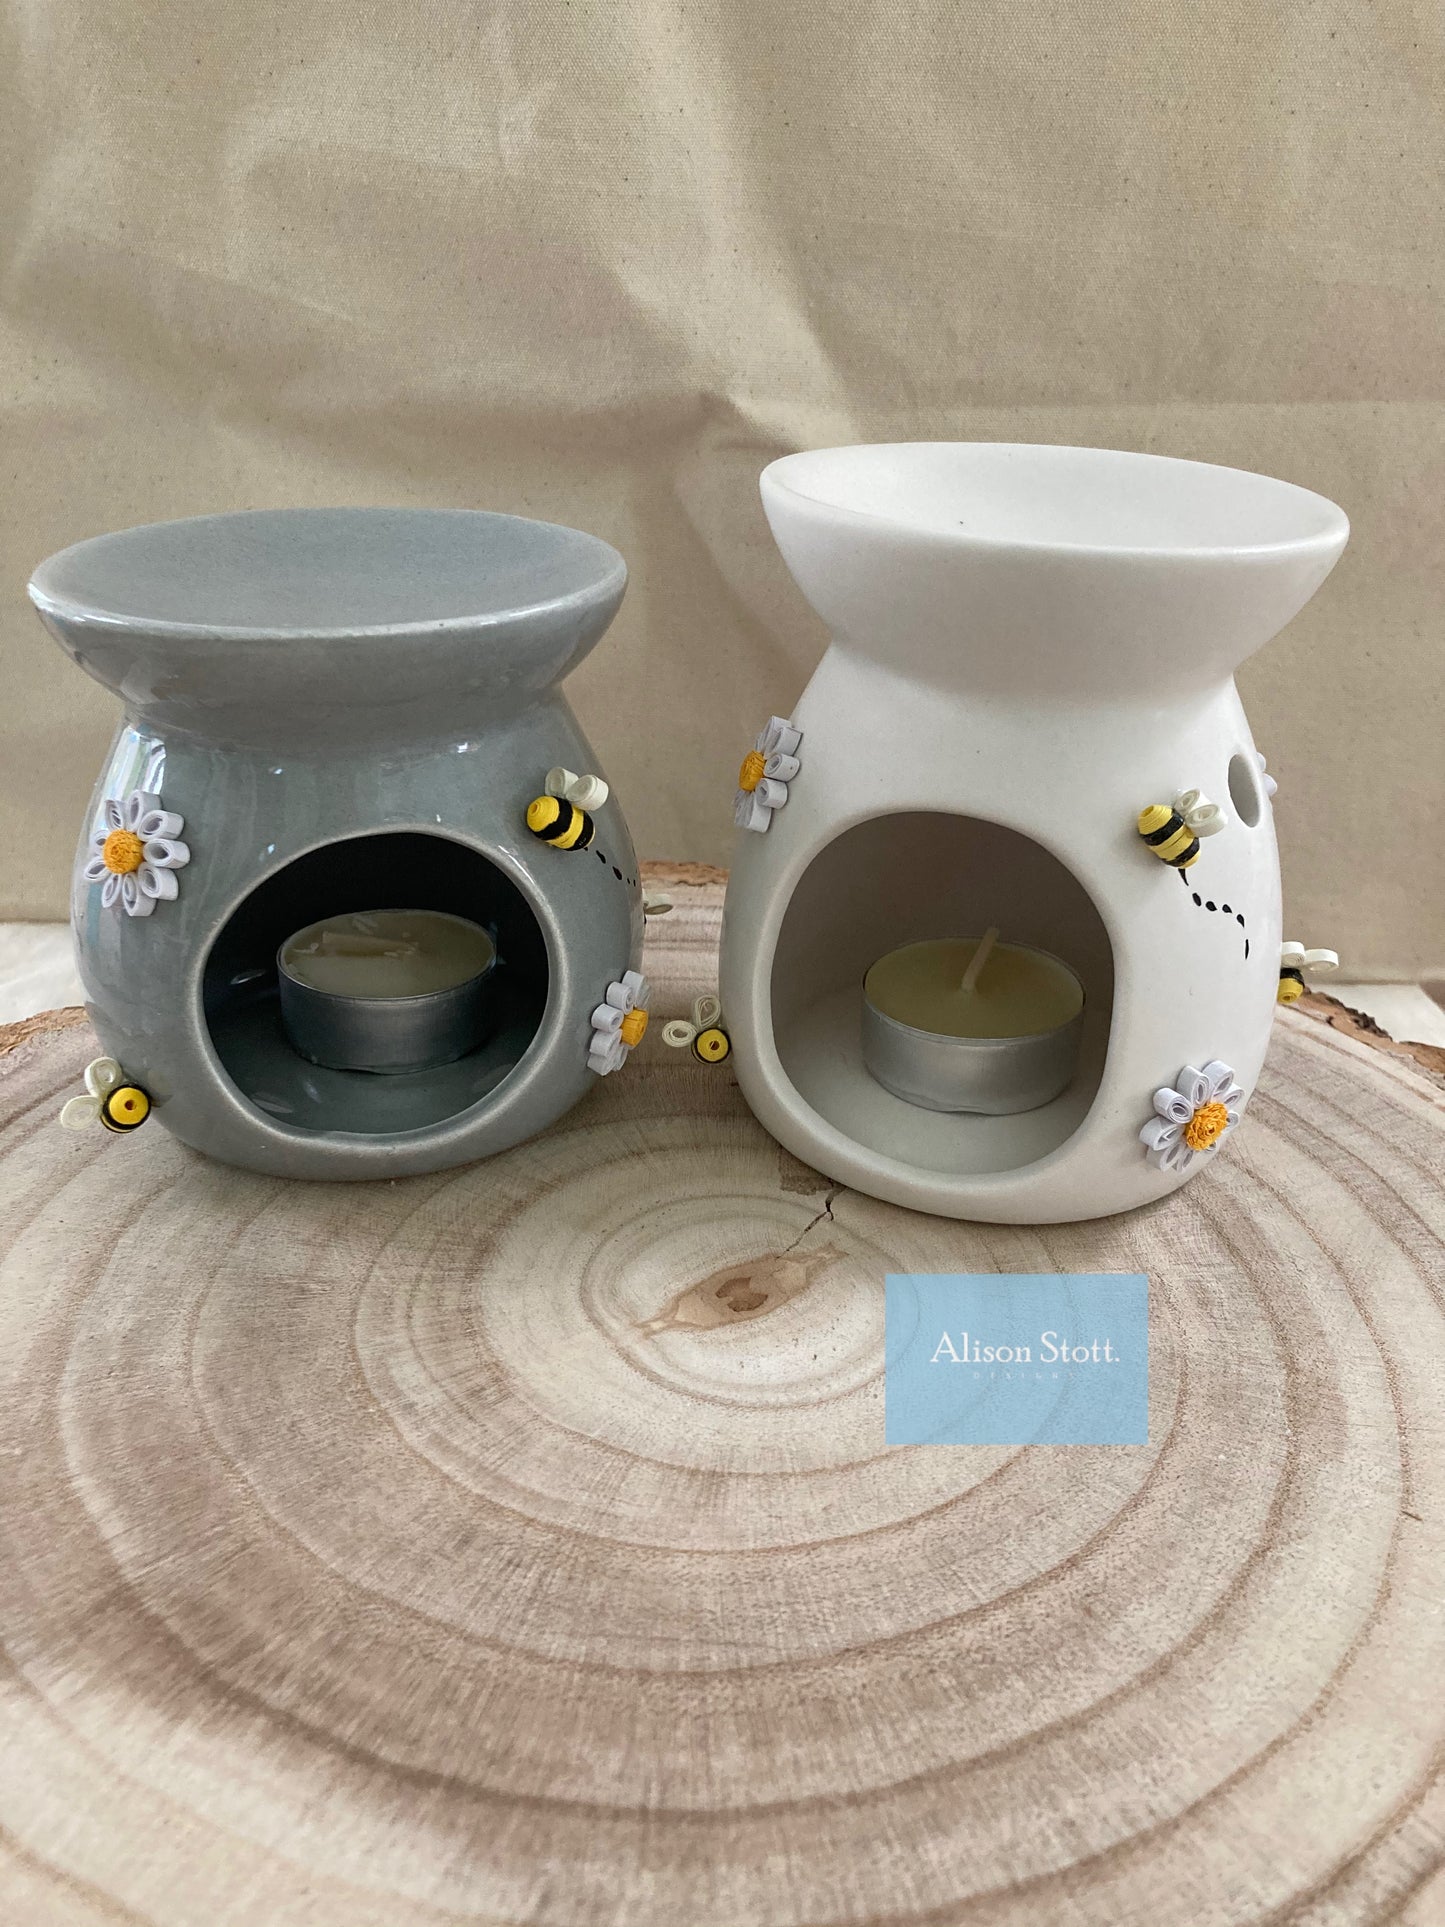 On offer was £9 now £8 Bee and daisy wax burner